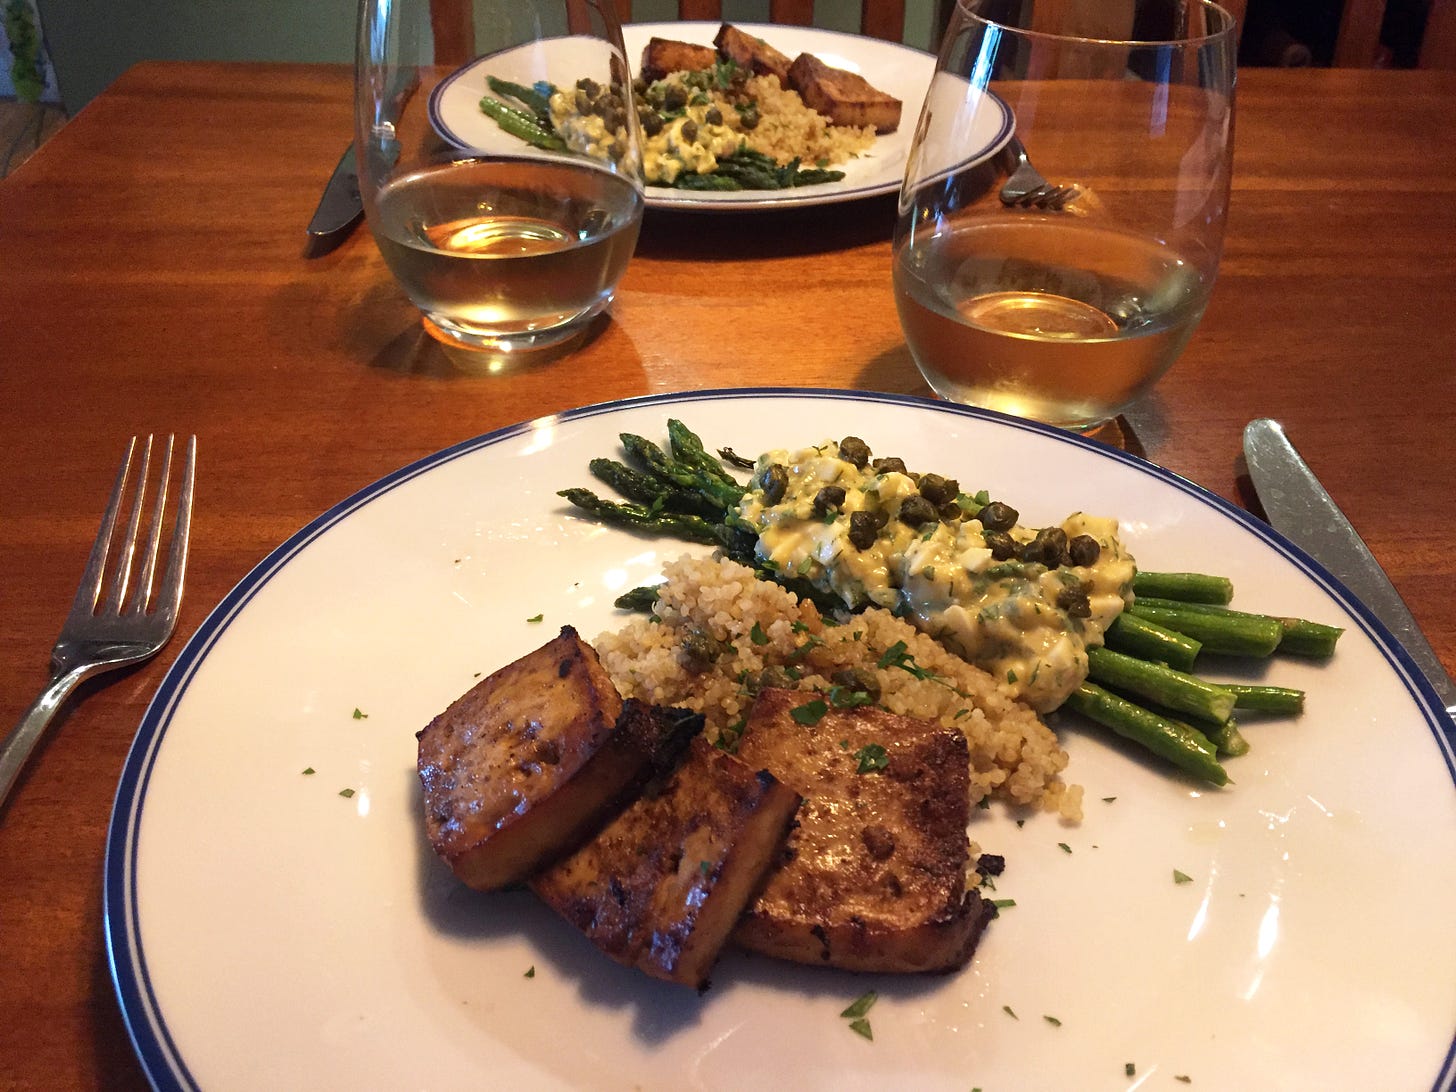 Two plates across from each other, each with browned marinated tofu arranged over quinoa with asparagus gribiche and capers. Stemless glasses of white wine sit besides the plates.